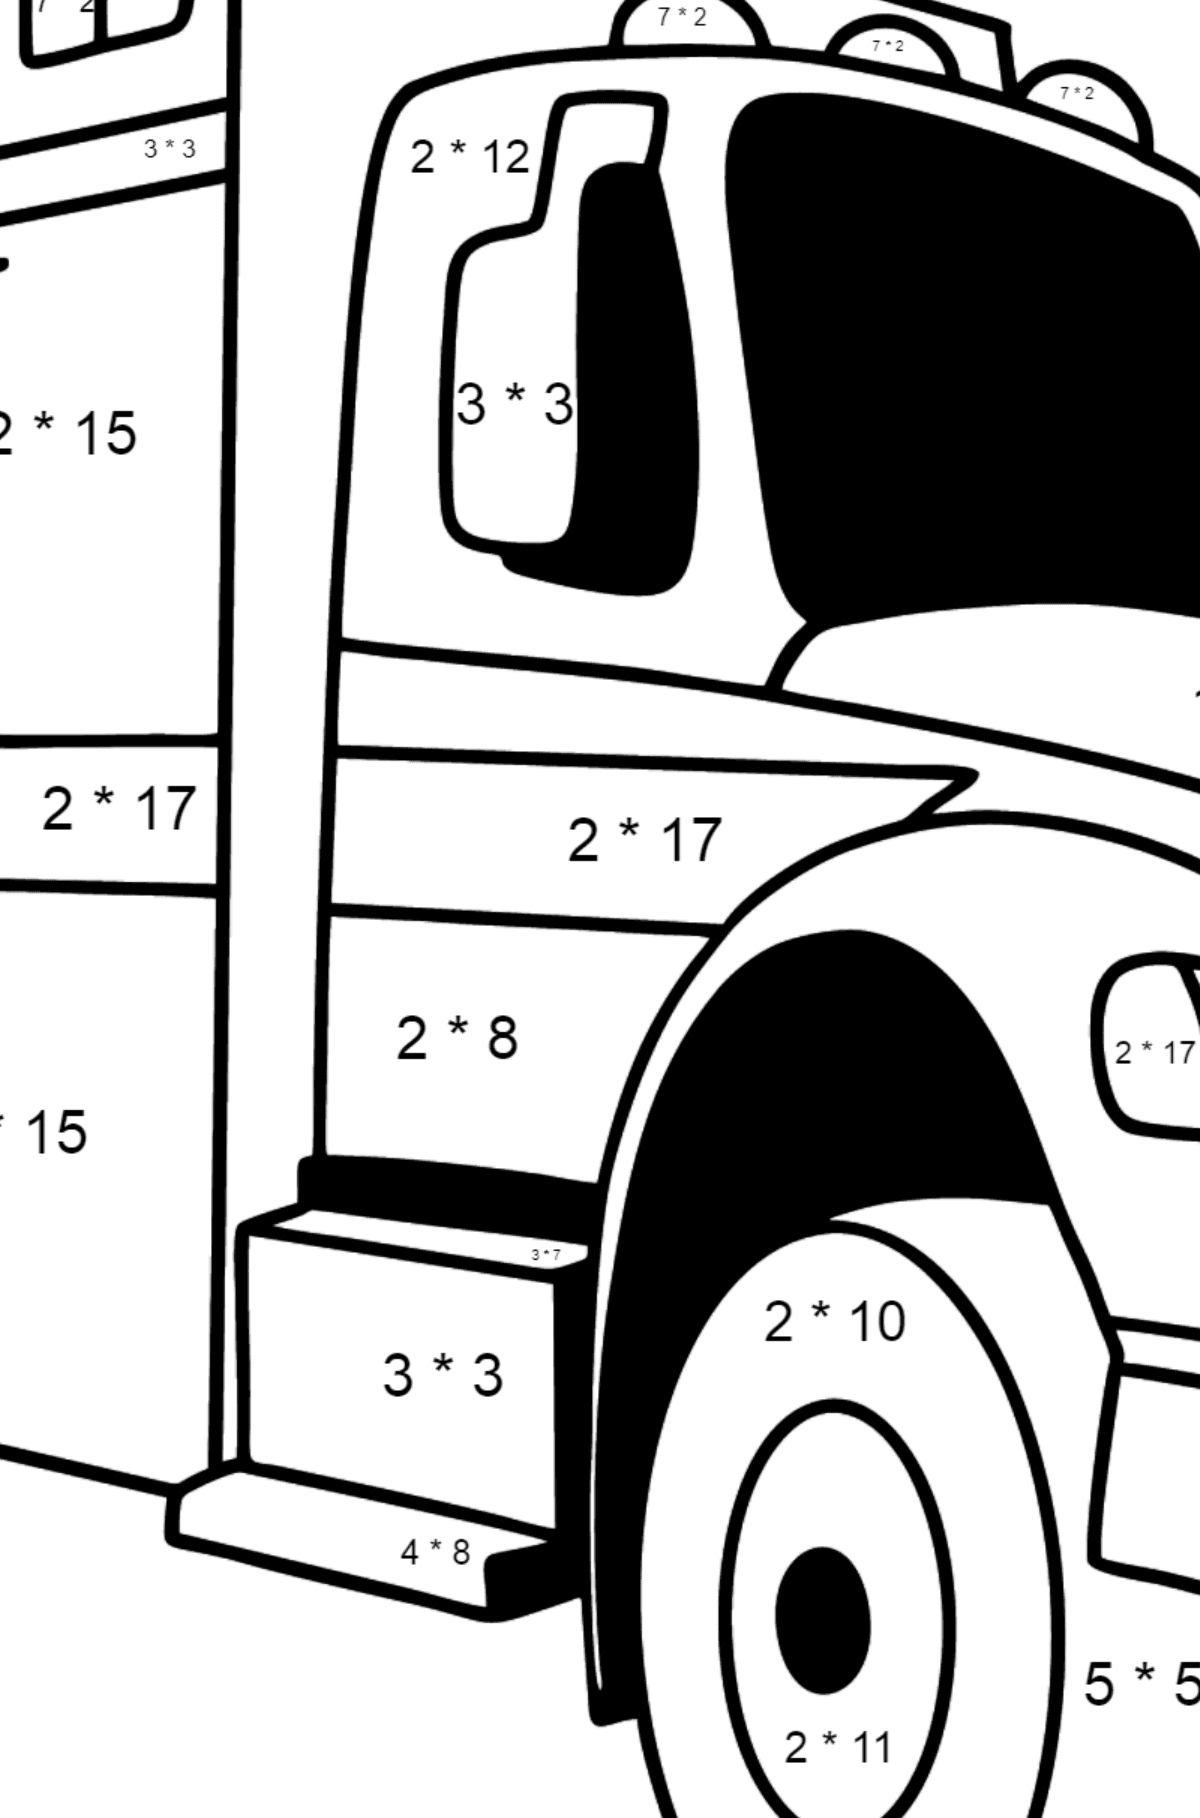 Fire Truck in Argentina coloring page - Math Coloring - Multiplication for Kids